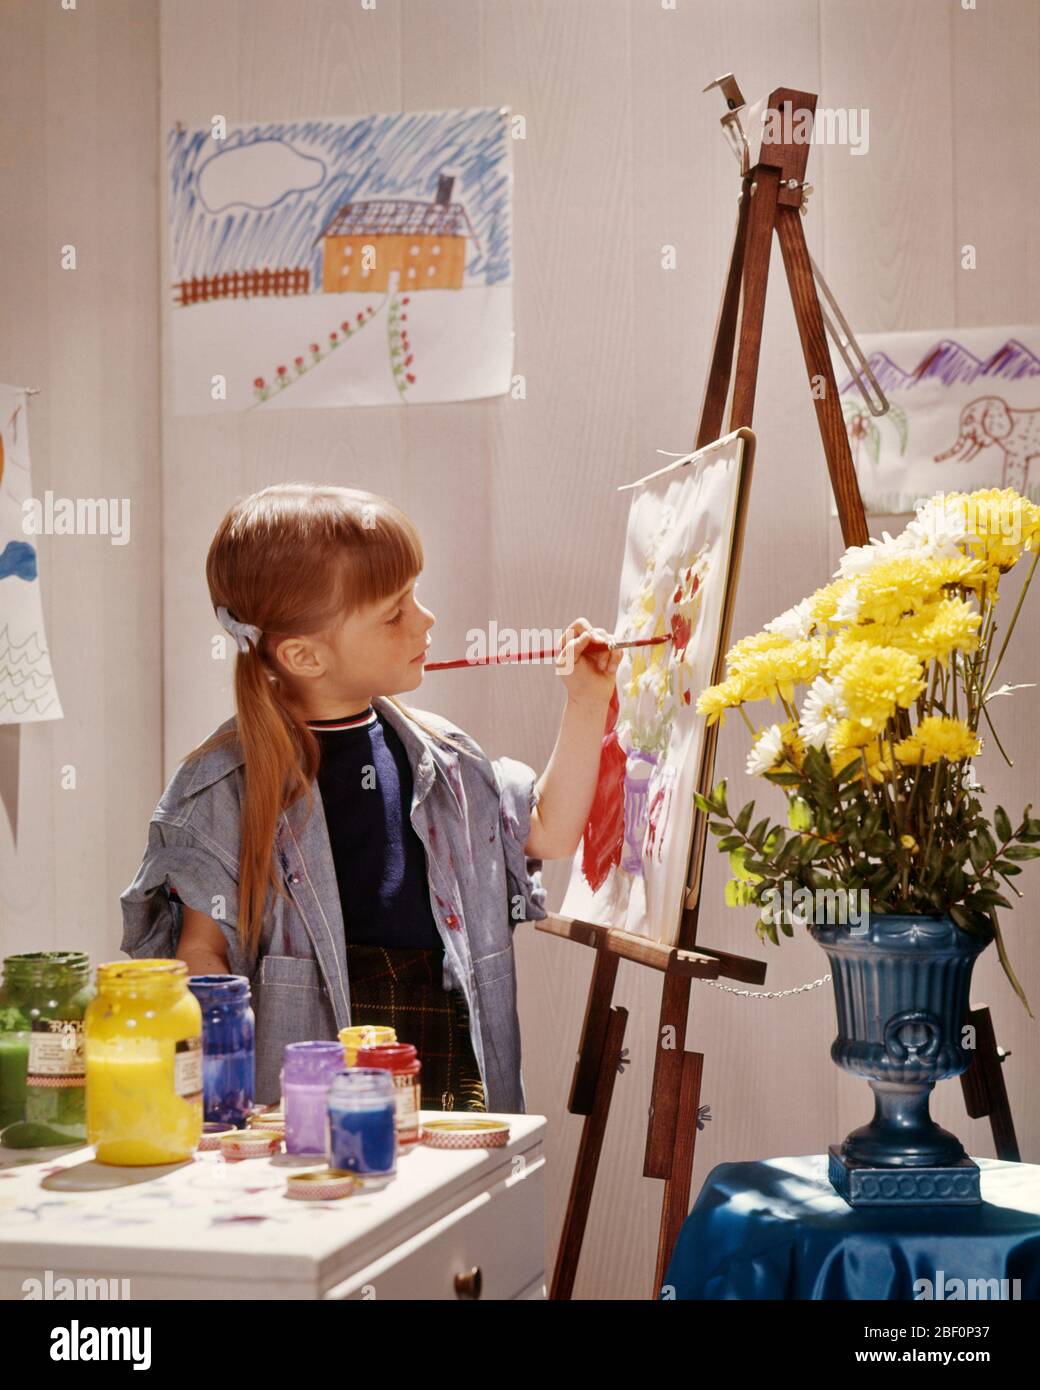 1980s GIRL AT EASEL PAINTING DRAWING PAINTS CANVAS ART ARTIST PONYTAIL SMOCK YELLOW CHRYSANTHEMUM FLOWERS IN VASE  - kj9587 PHT001 HARS CANVAS HAIRSTYLE CHRYSANTHEMUM CREATOR OCCUPATIONS PONYTAIL PRIMARY ART CLASS CONCEPTUAL IMAGINATION PAINTS SMOCK COOPERATION CREATE CREATIVITY GRADE SCHOOL GROWTH PIG TAIL BANGS CAUCASIAN ETHNICITY OLD FASHIONED Stock Photo